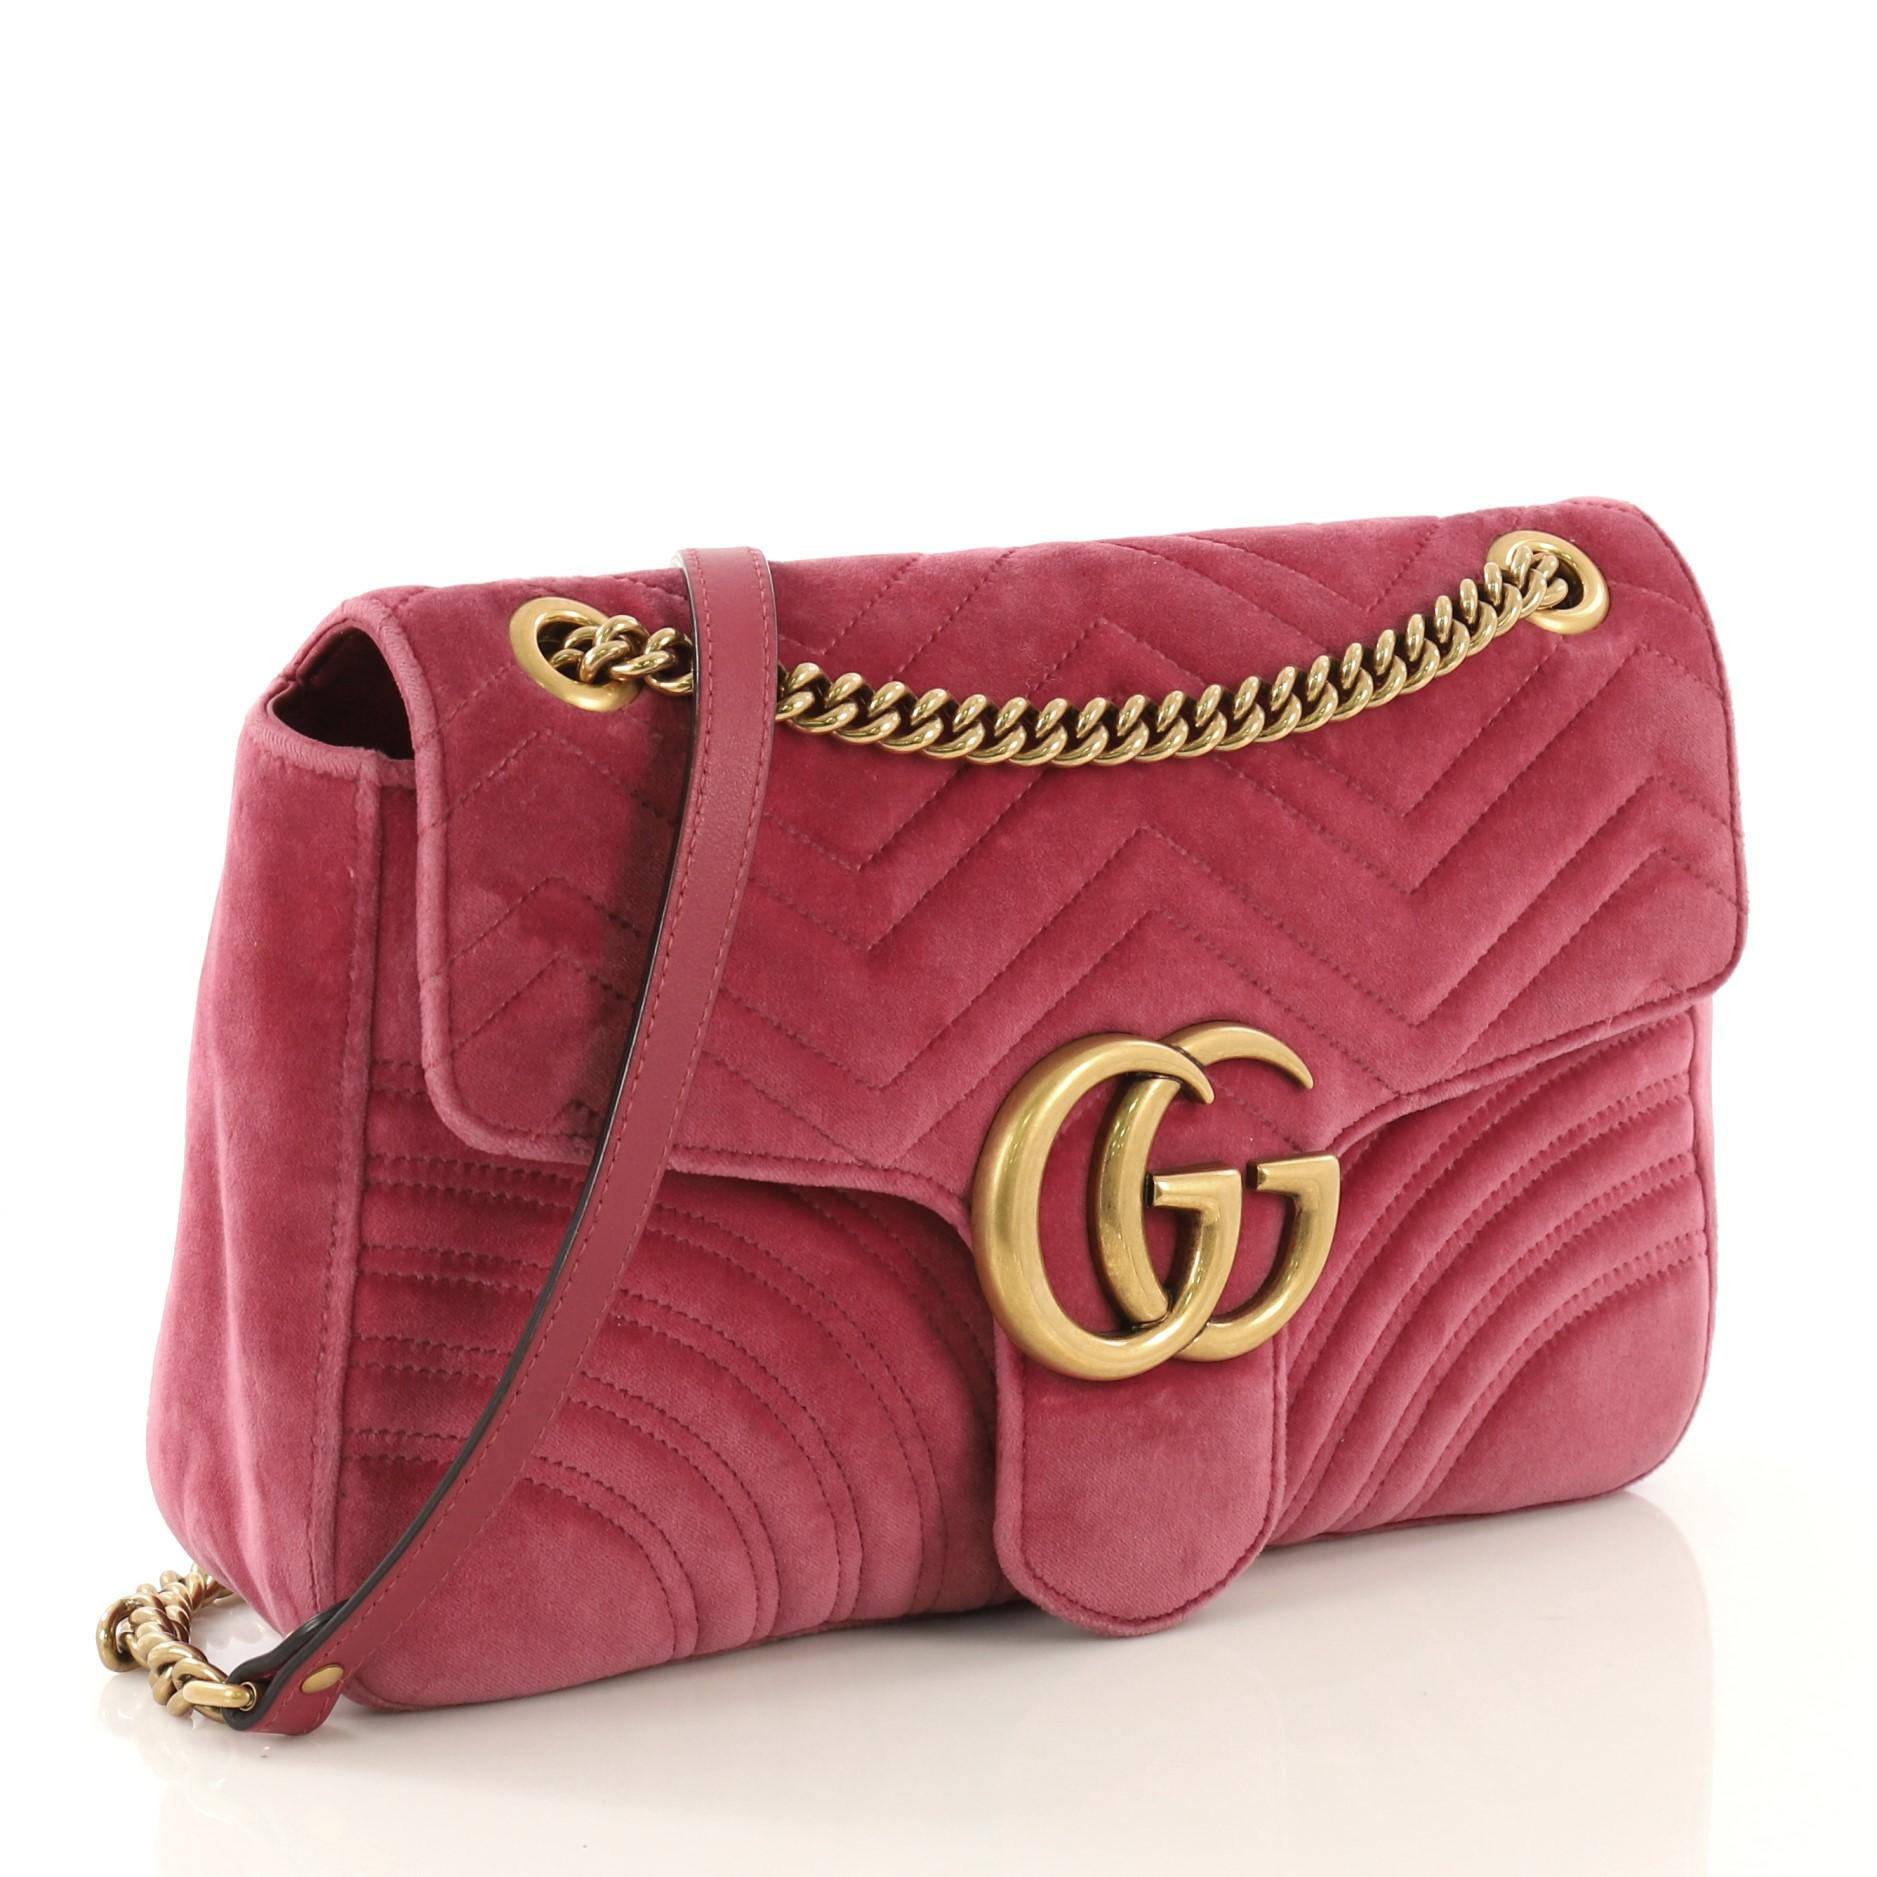 This Gucci GG Marmont Flap Bag Matelasse Velvet Medium, crafted from pink matelasse velvet, features a chain link strap with leather pad, flap top with GG logo, and aged gold-tone hardware. Its push-lock closure opens to a blue satin interior with